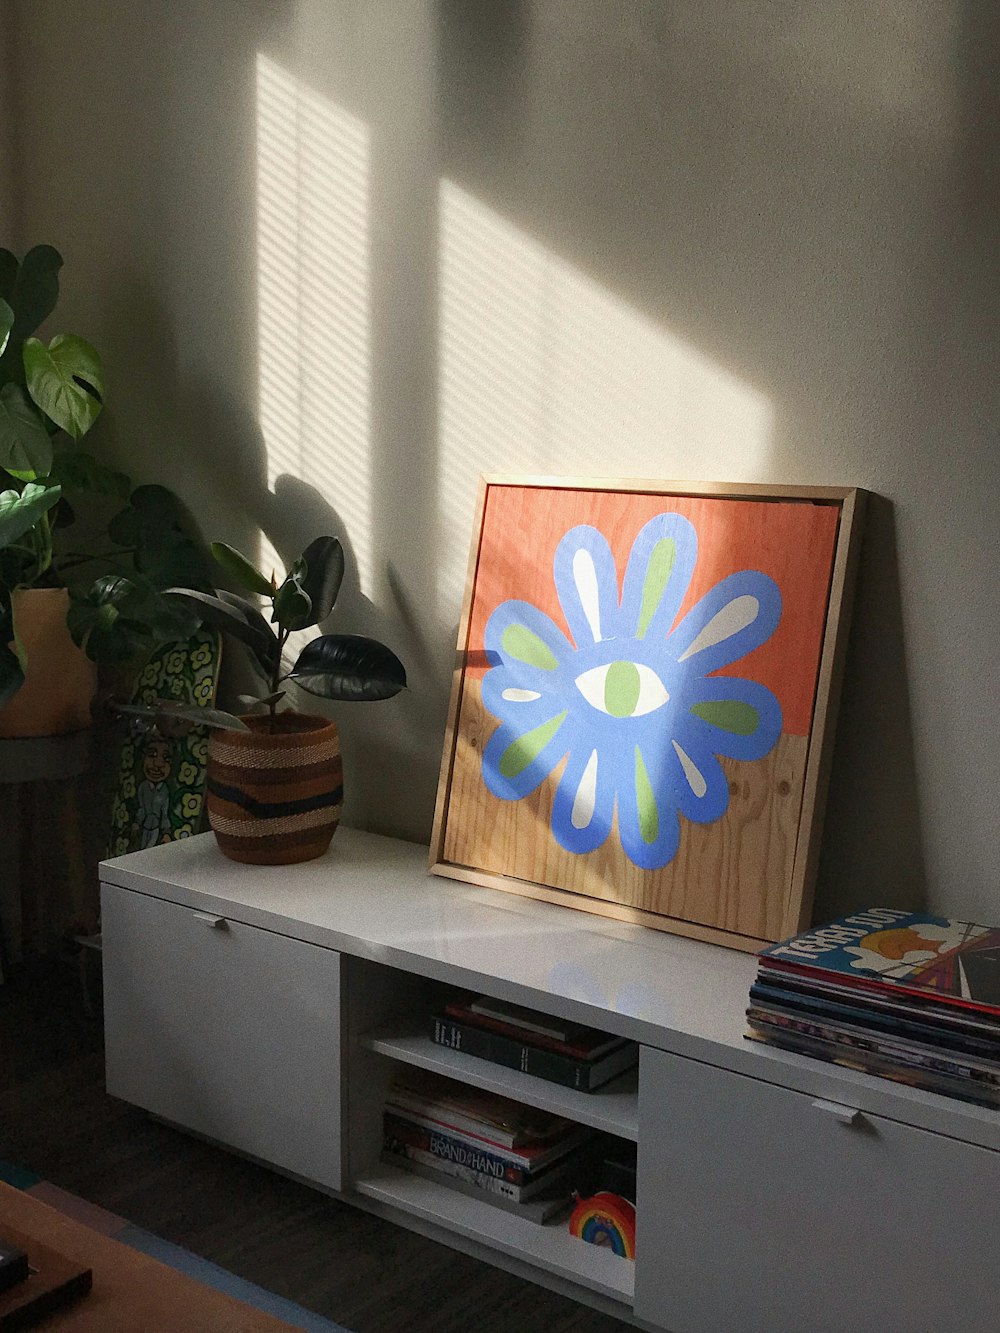 a picture of a flower on a shelf in a room